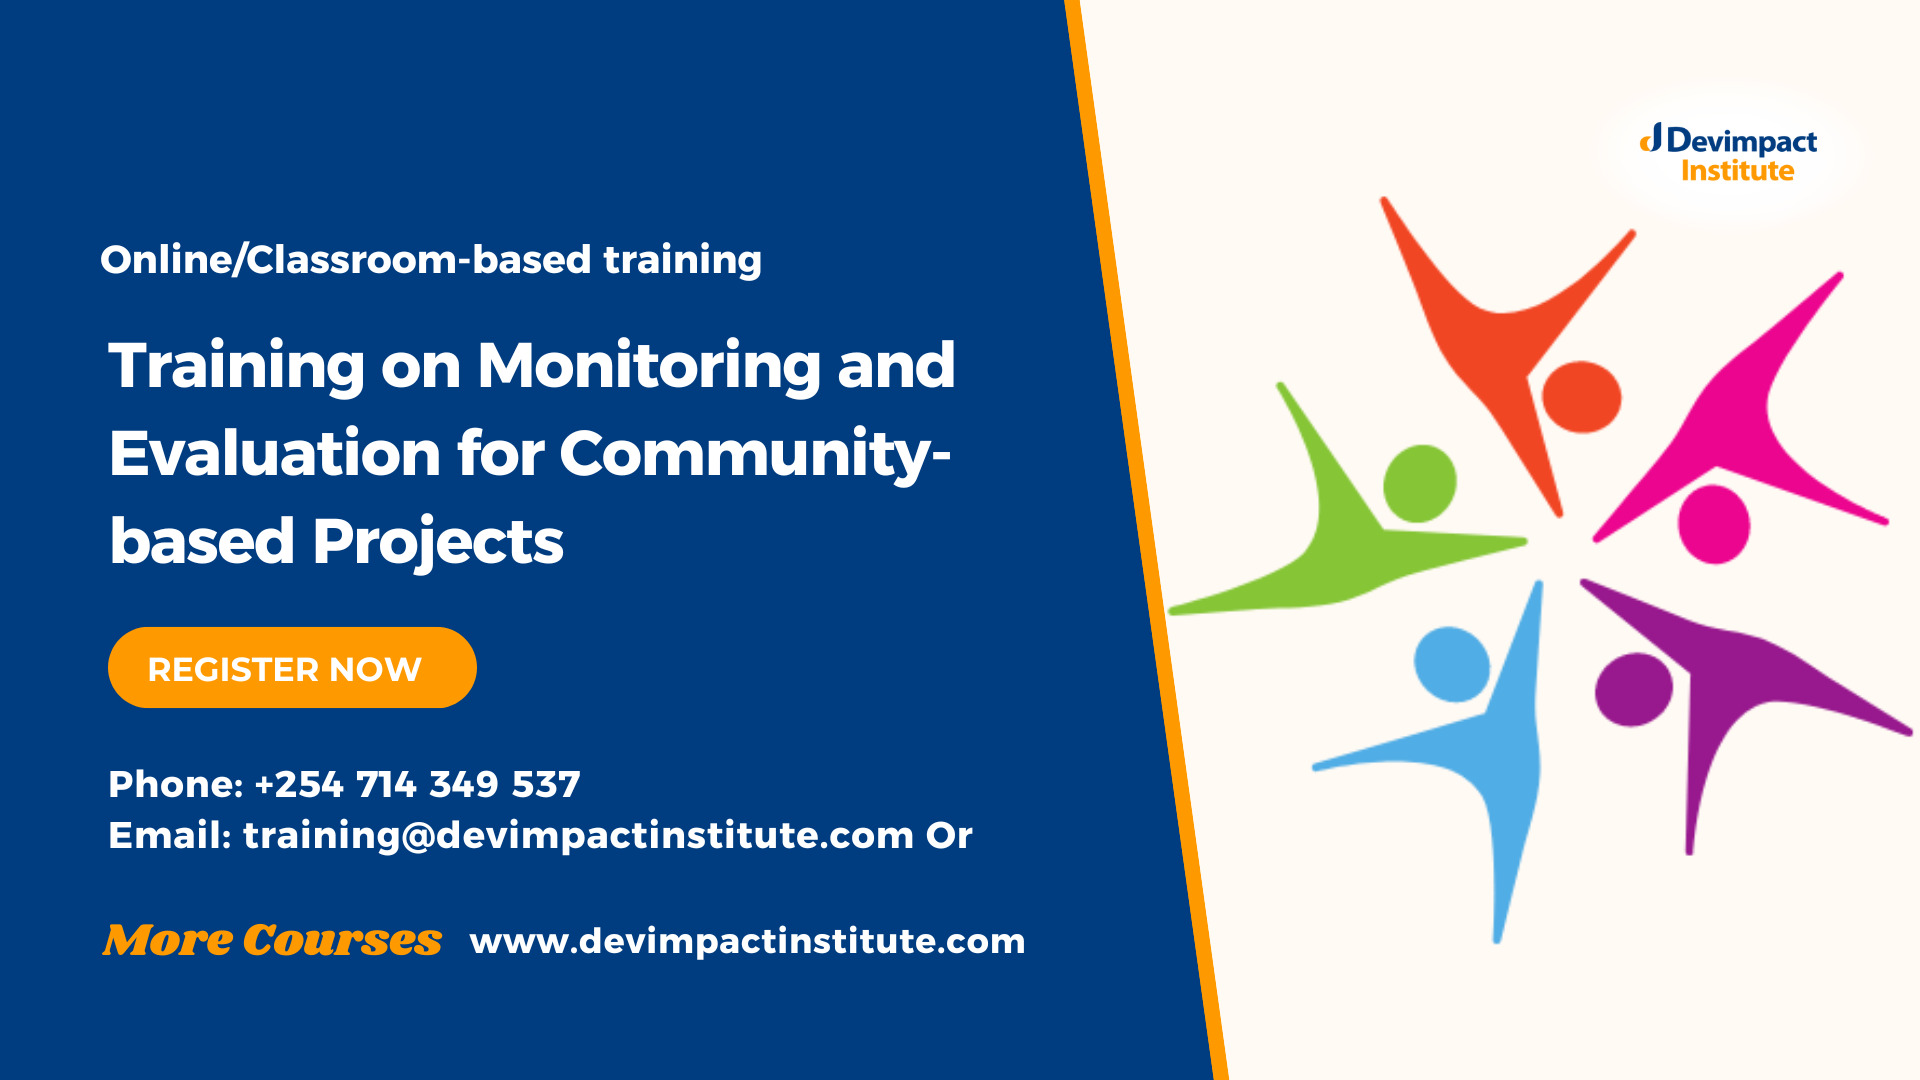 Training on Monitoring and Evaluation for Community-based Projects, Devimpact Institute, Nairobi, Kenya